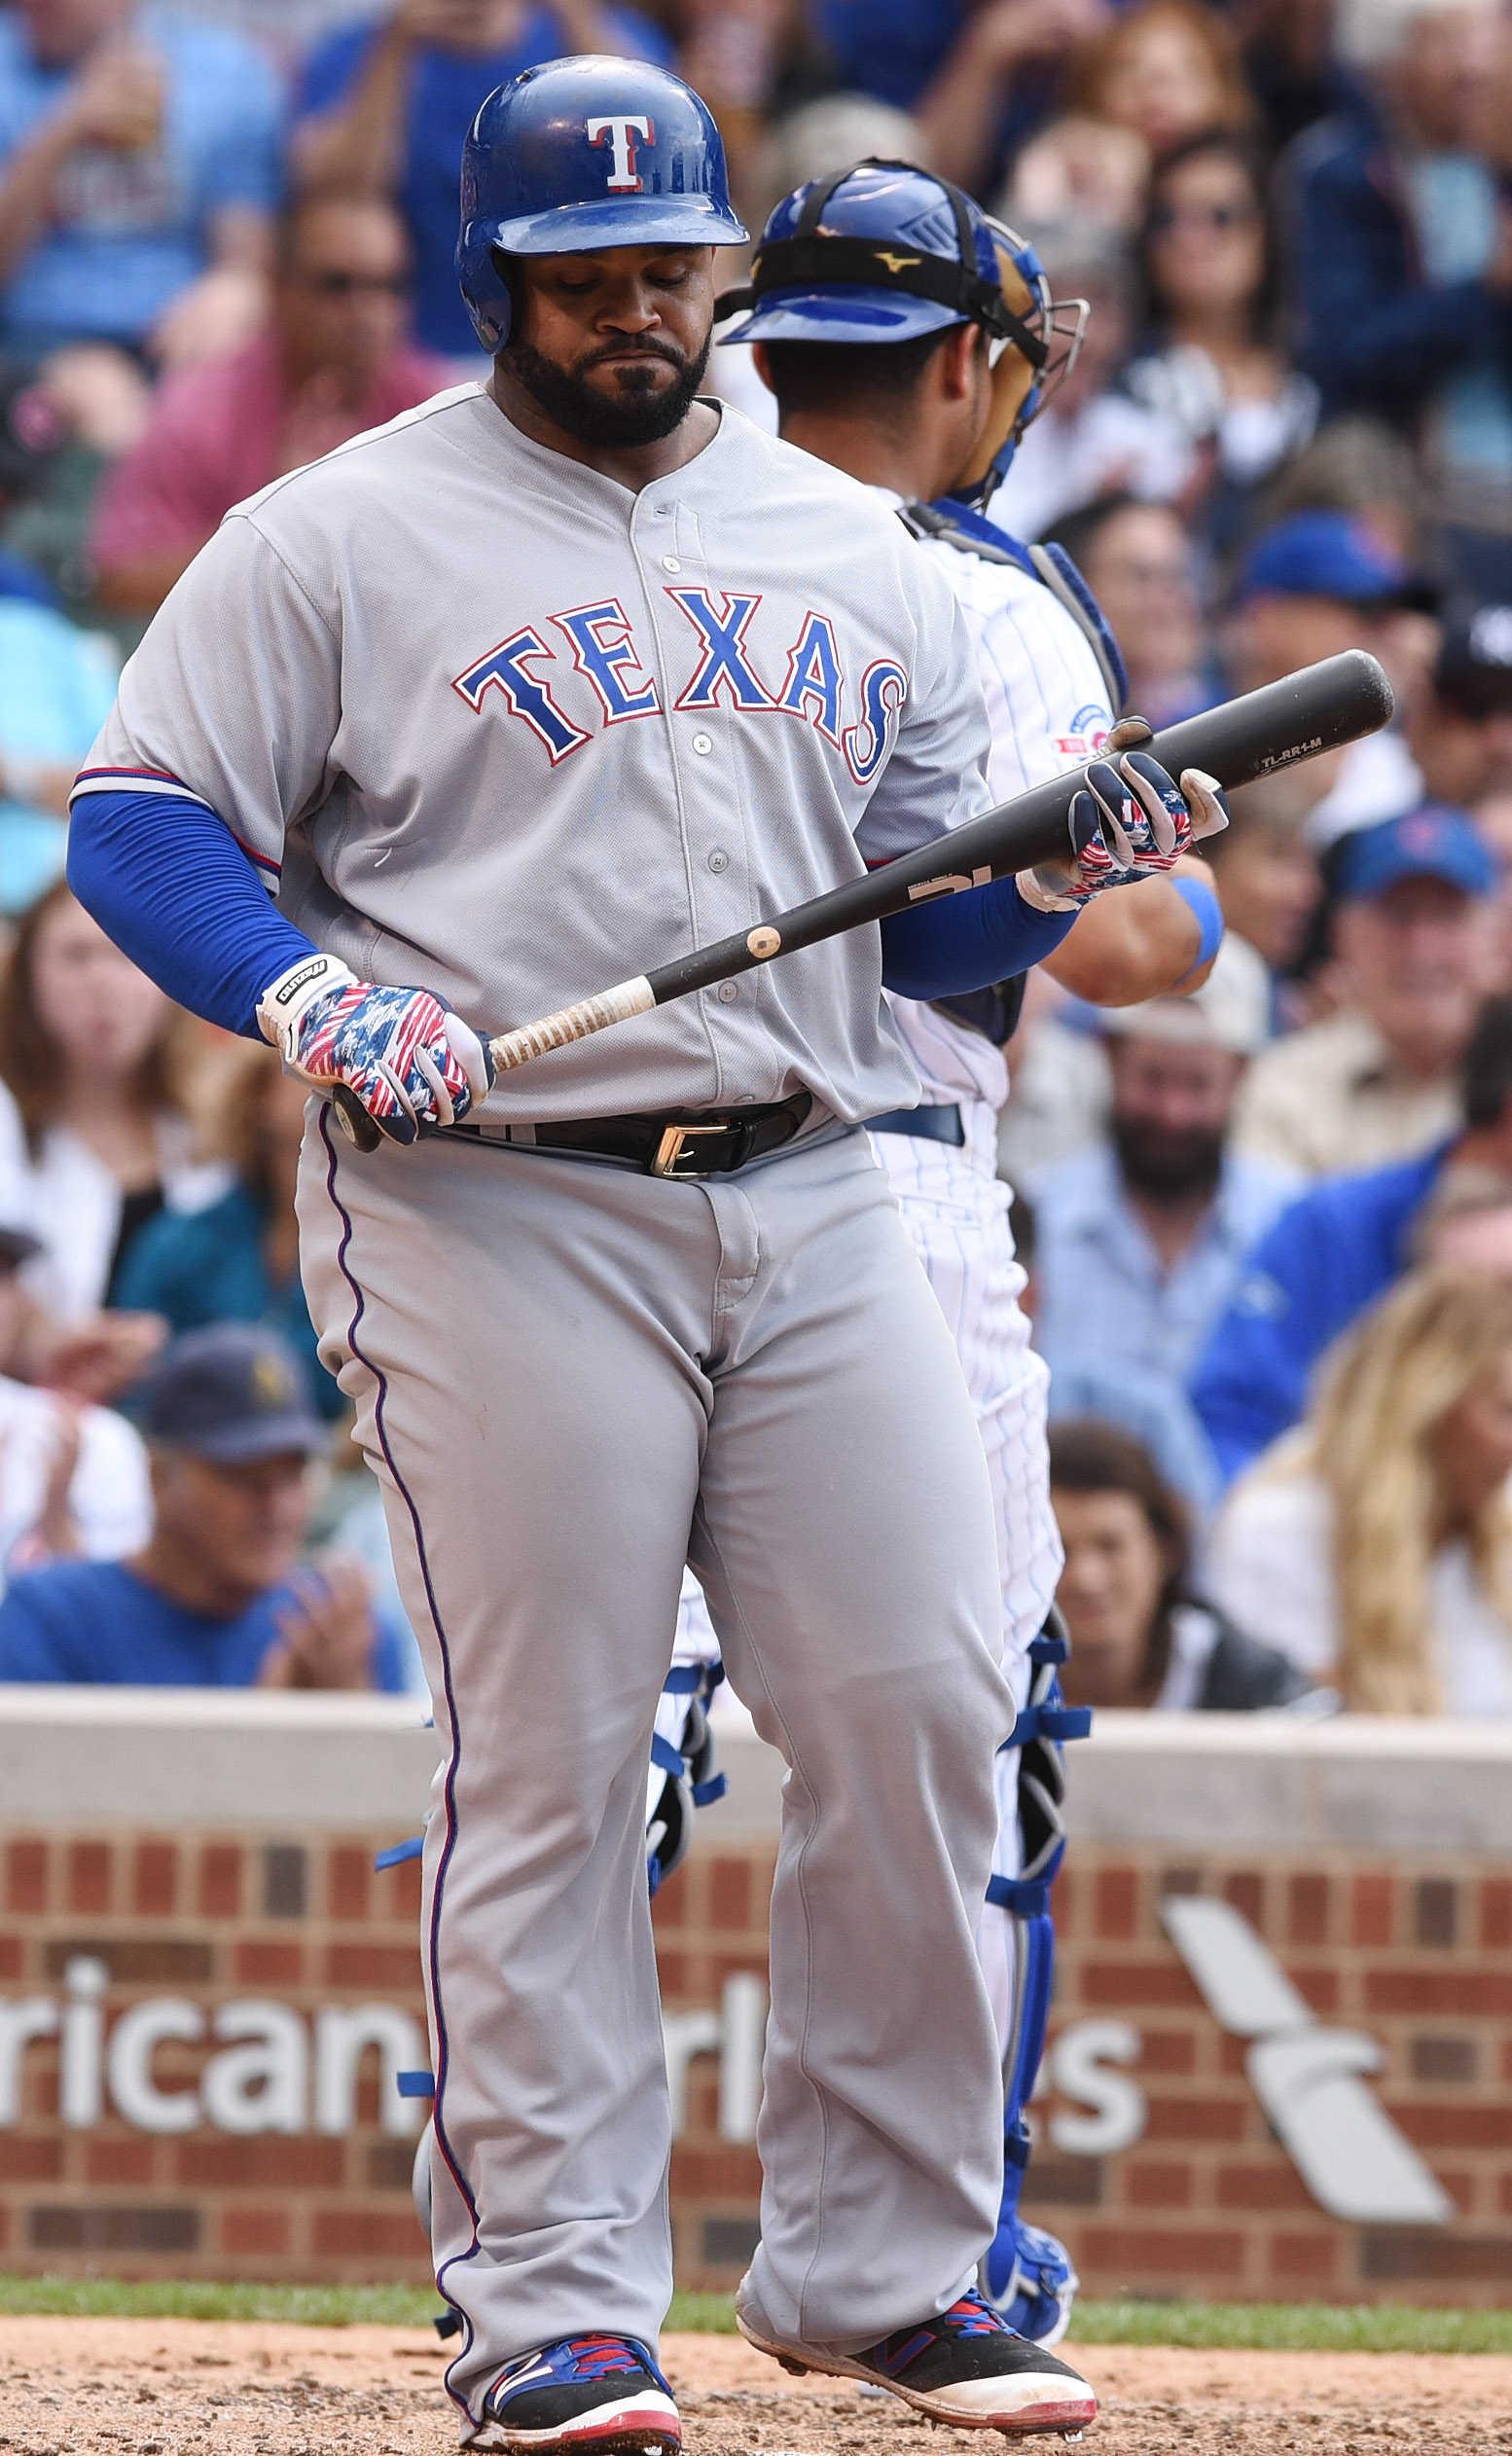 Texas Rangers' Prince Fielder asks for time after sliding into